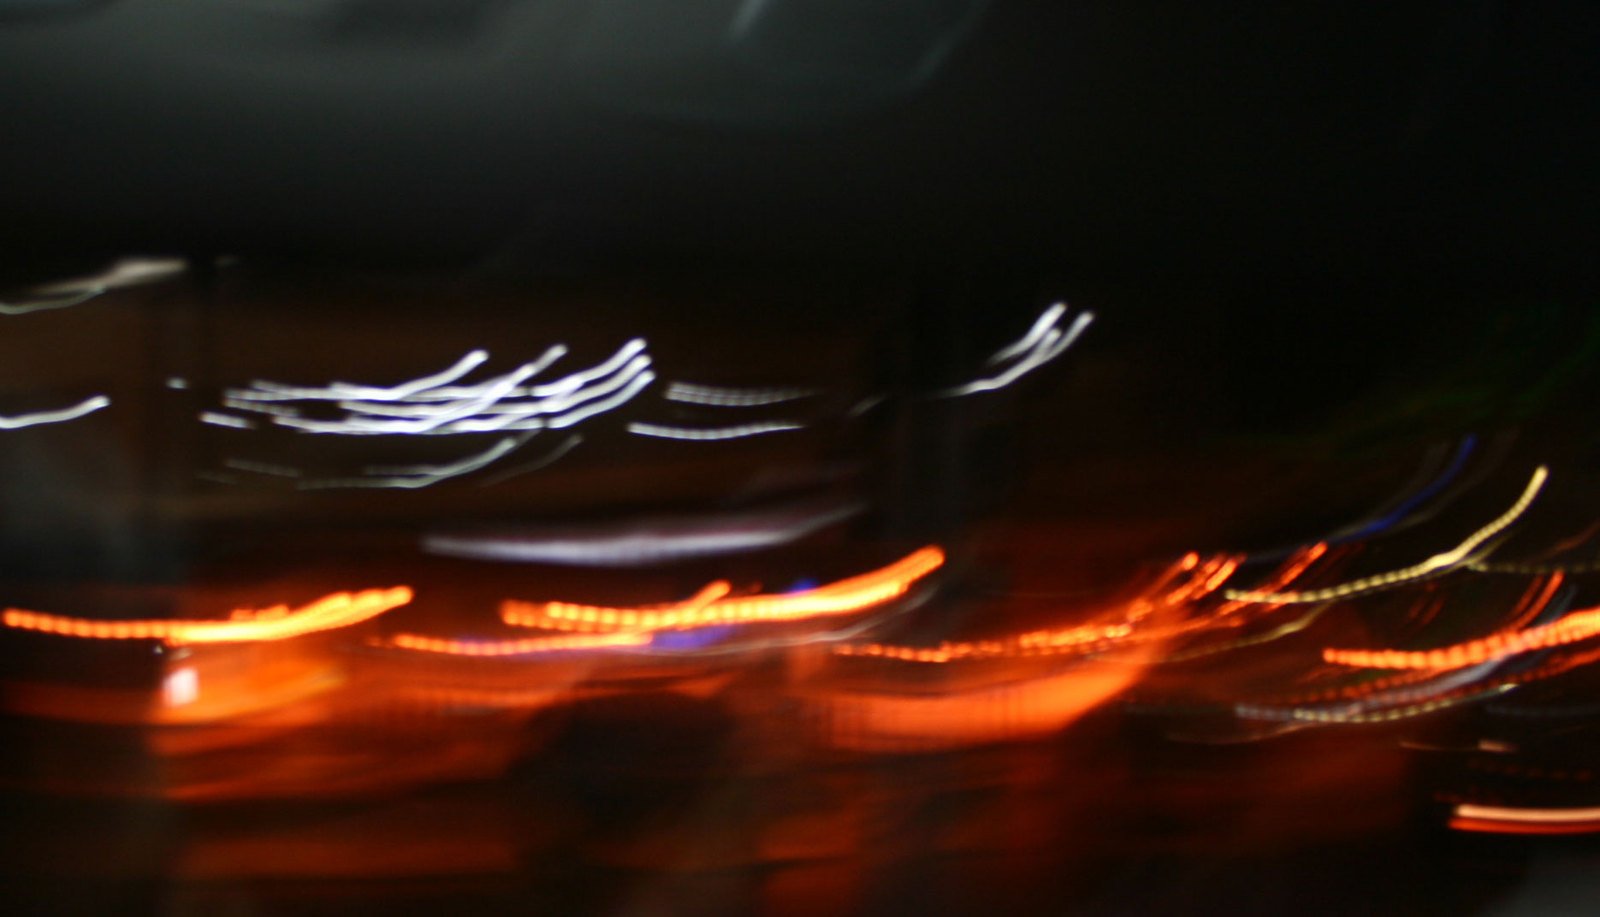 the picture shows blurry motion of some lights in a dark room